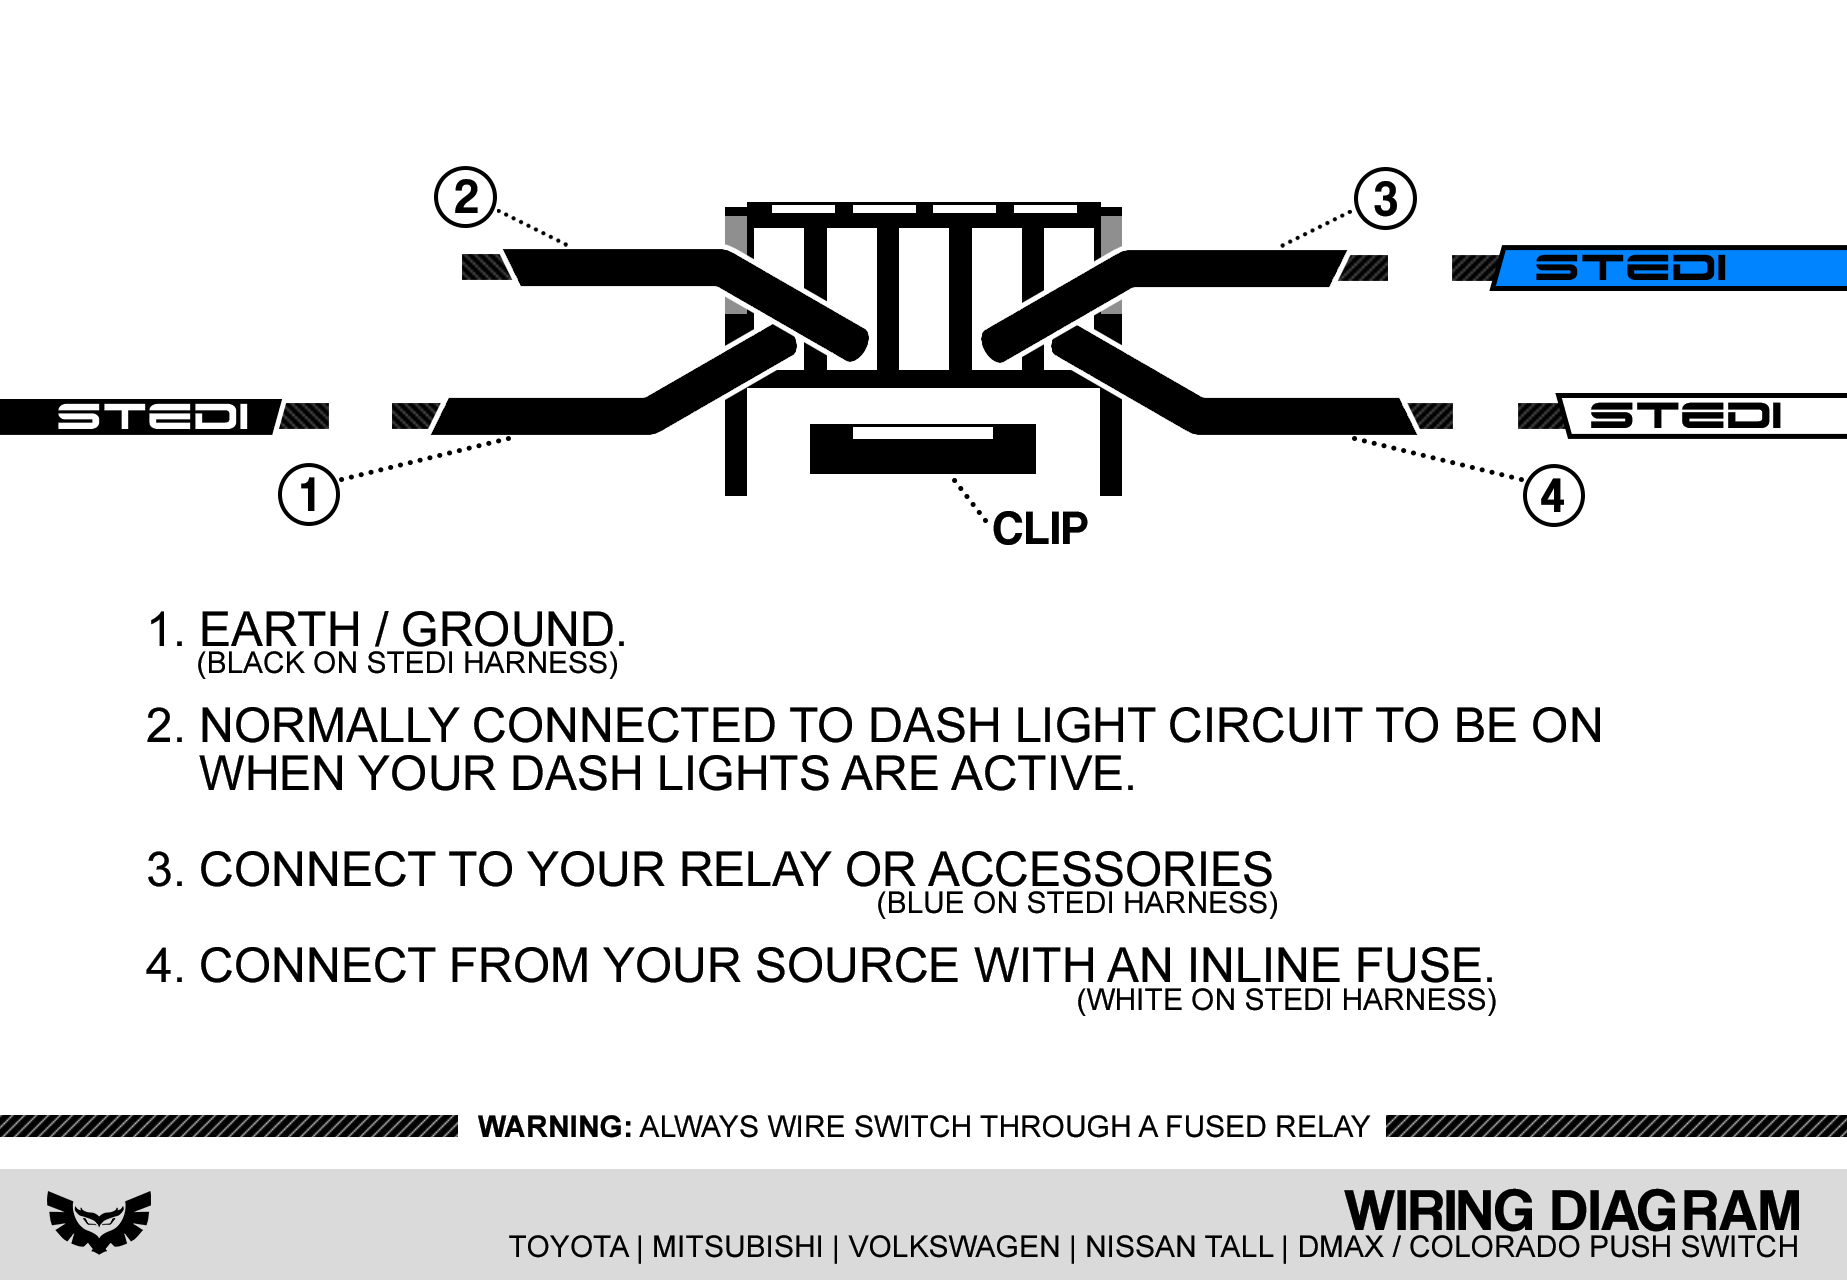 Kemimoto Led Light Bar Switch Wiring Diagram from support.stedi.com.au